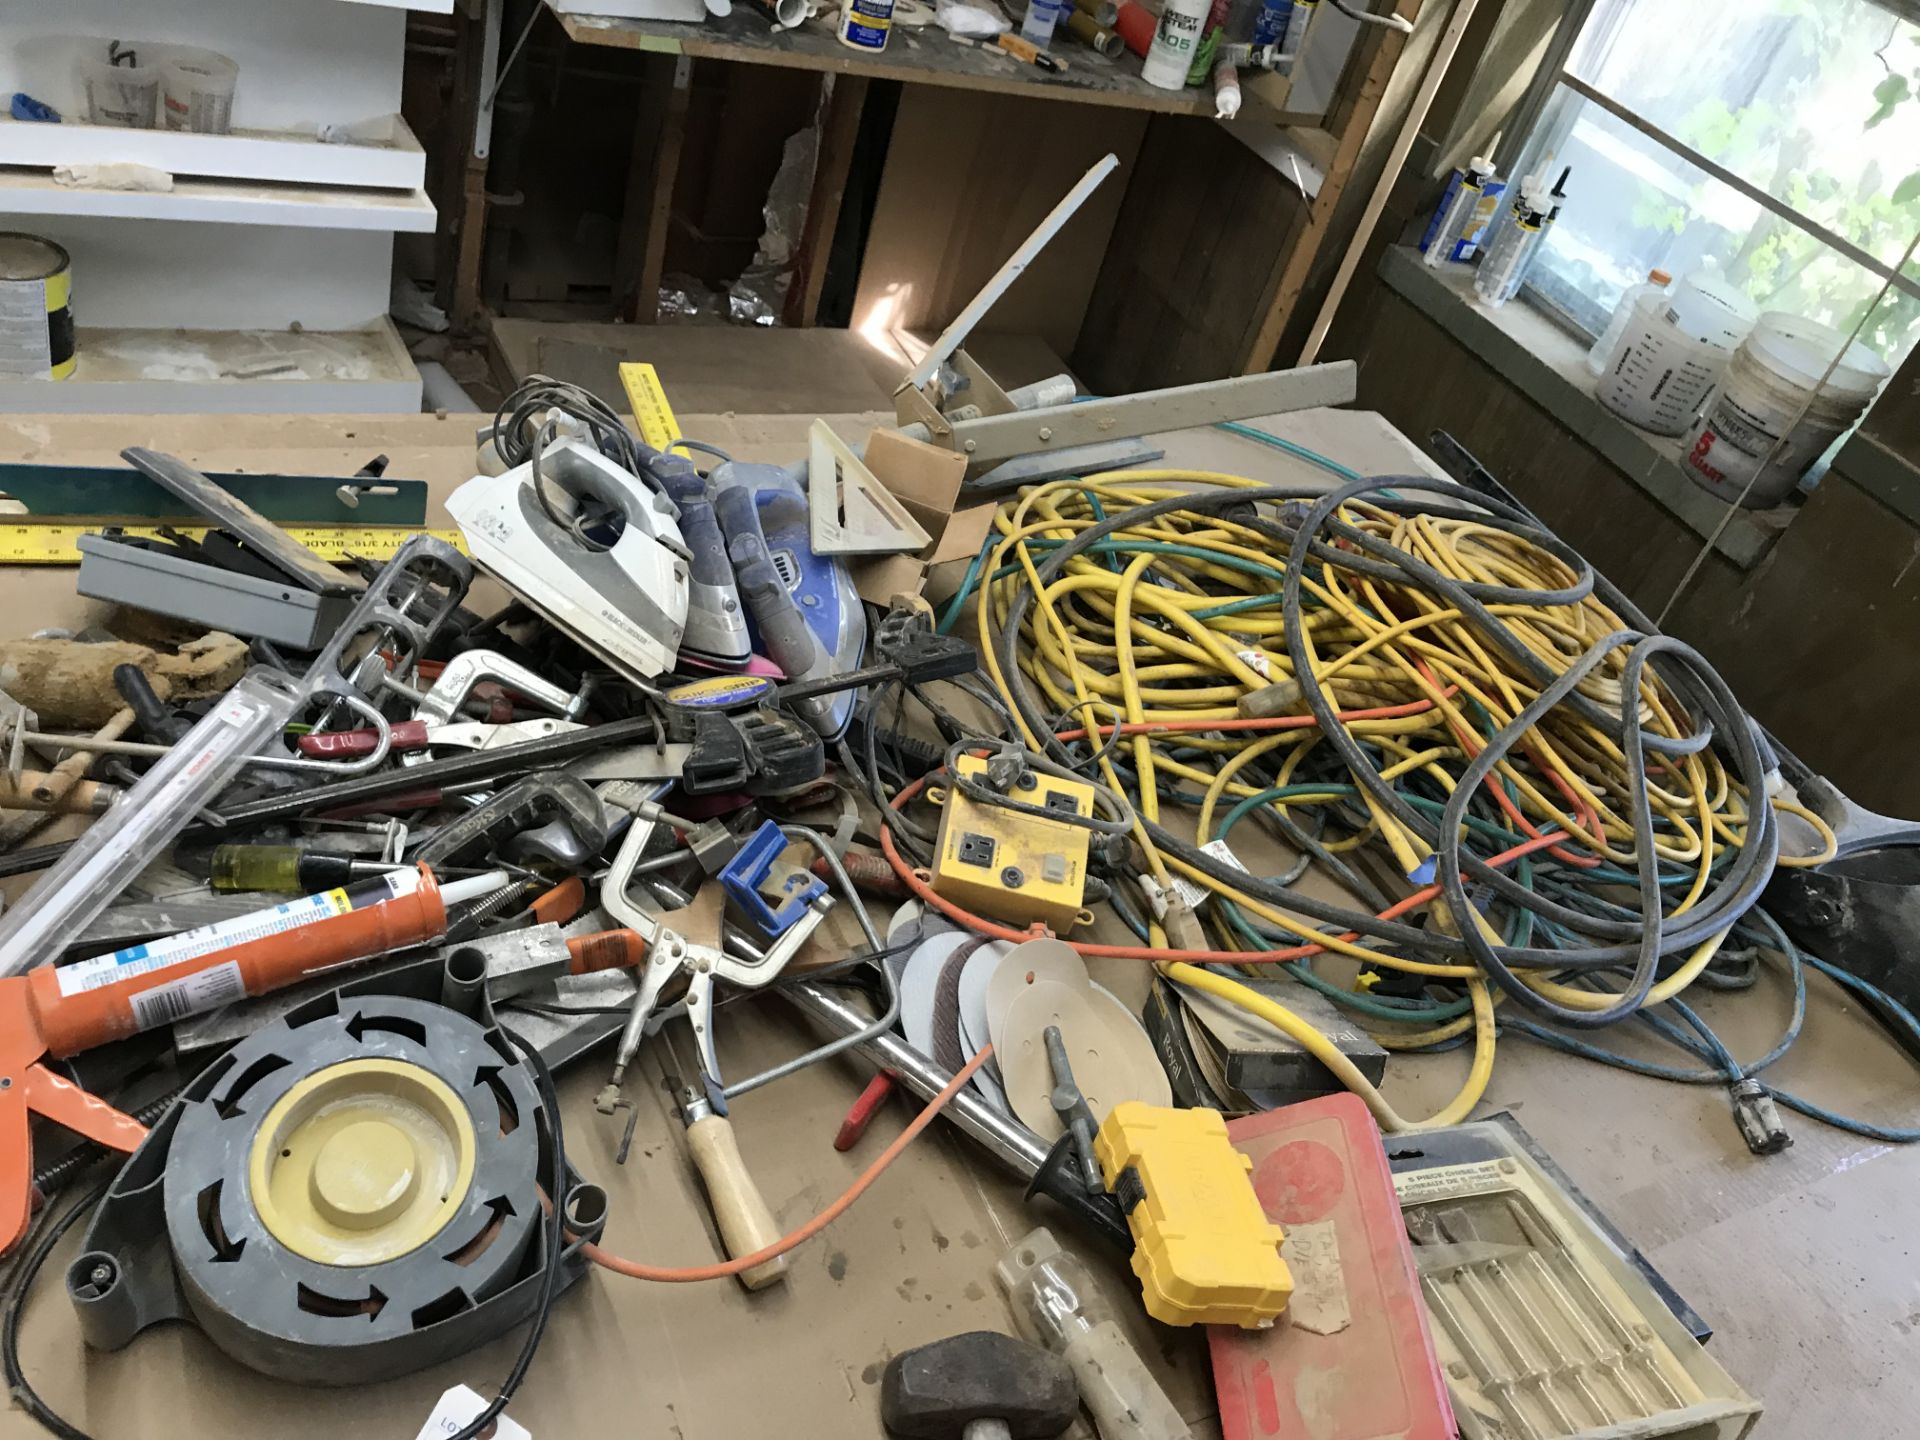 {LOT} Balance on Table C/O: Extension Cords, Clamps, Irons, ETC